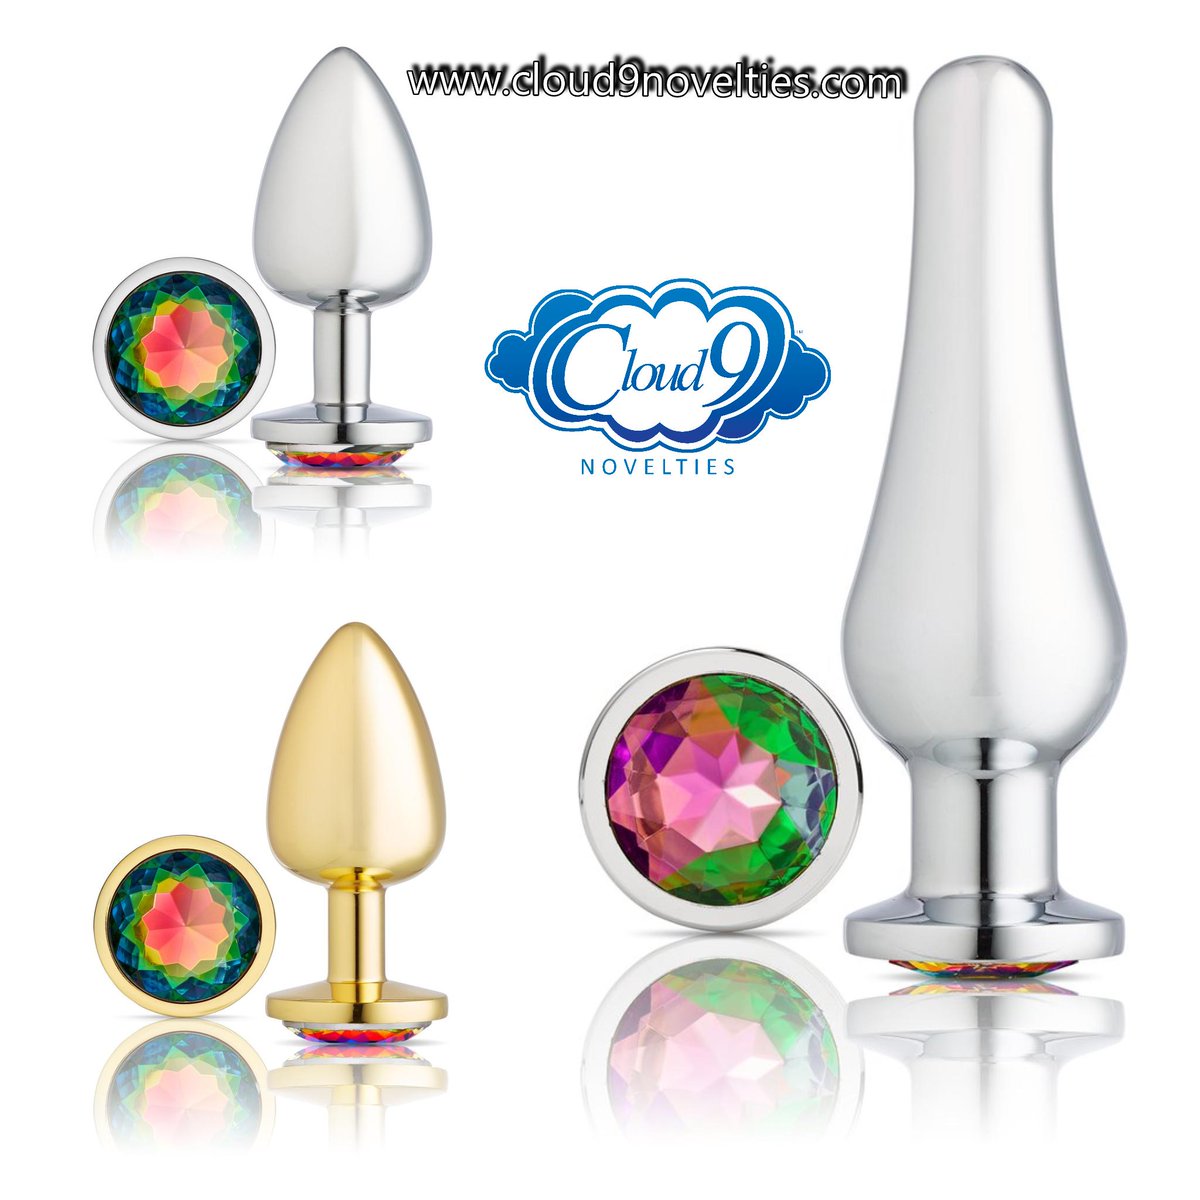 This Cloud 9 Novelties GEM anal plugs are both visually stunning and ideal for stimulating anal play. #sparkling #jewel #makes #playtime #fundafun cloud9novelties.com/search?q=GEMS+